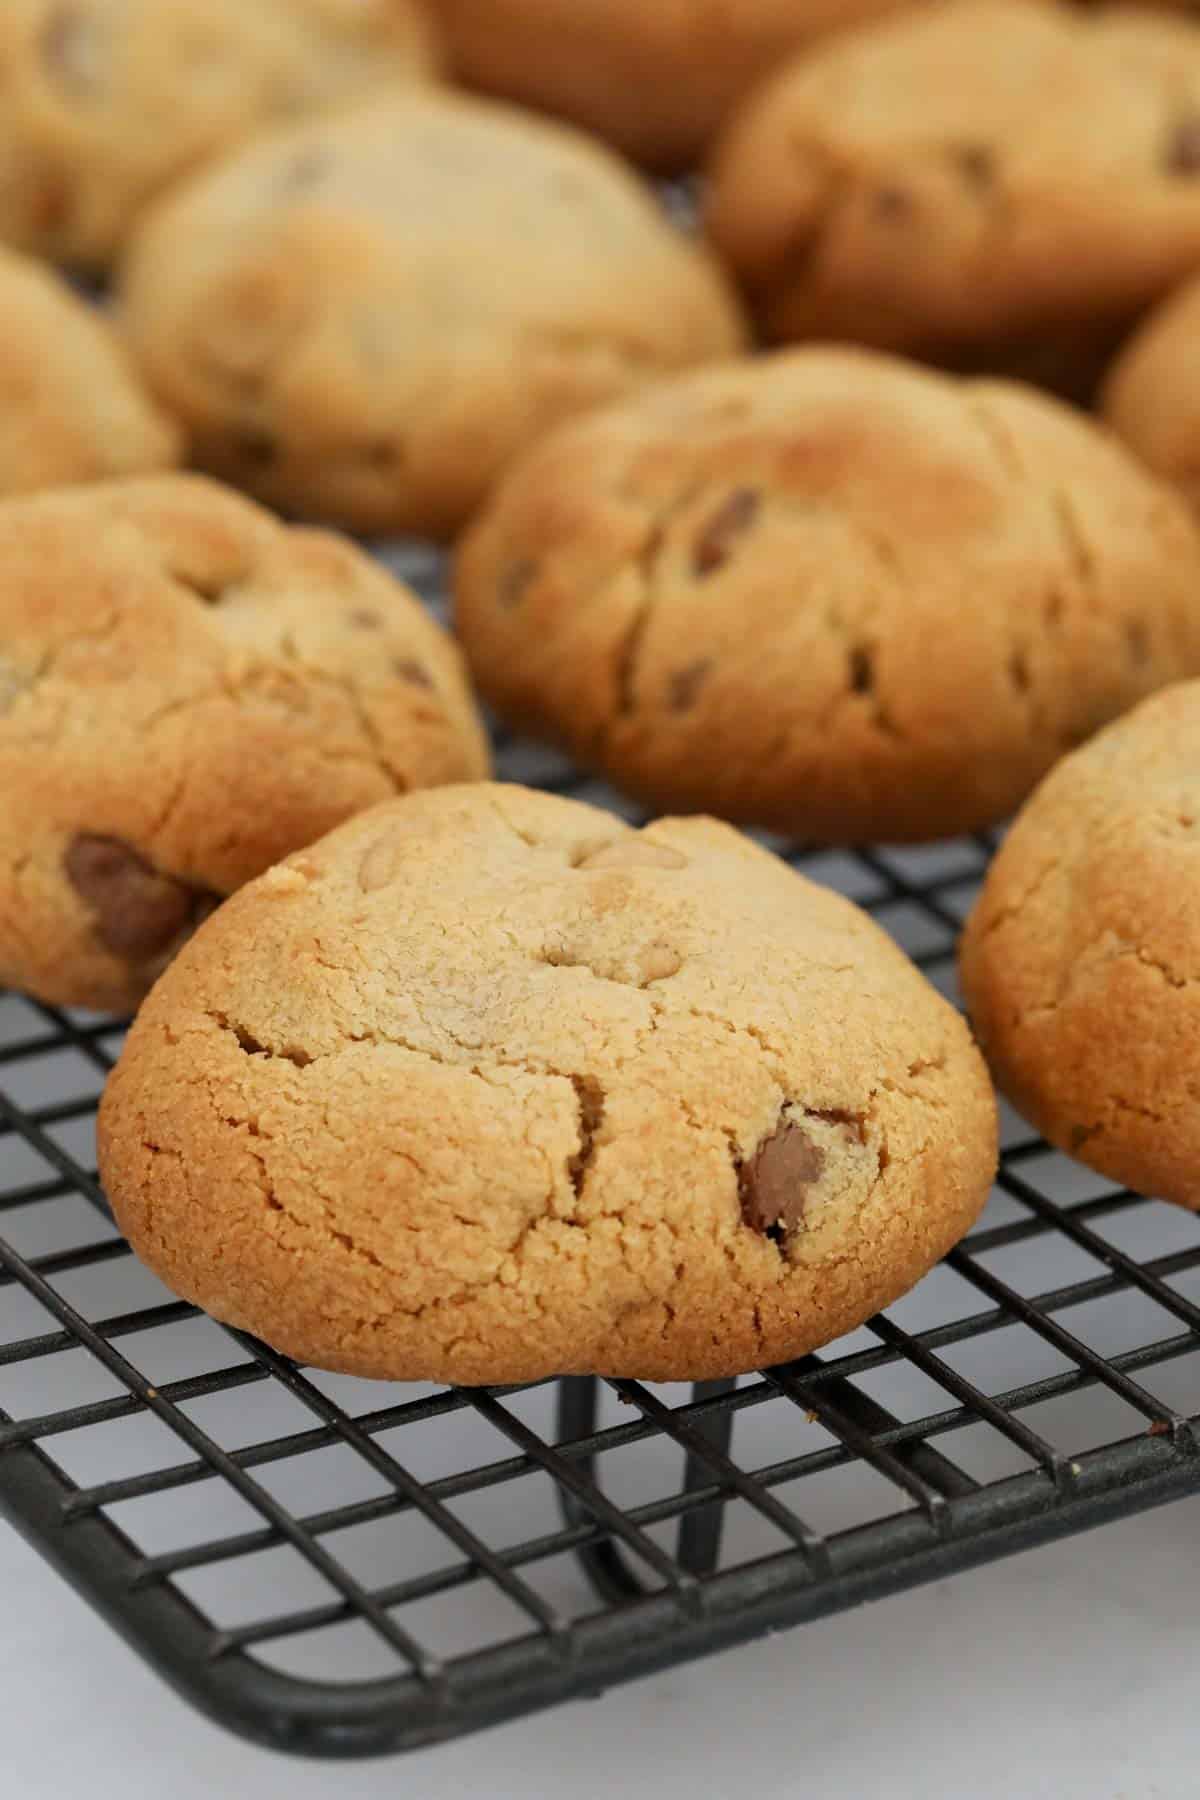 Baked cookies cooling on a wire cooling rack.